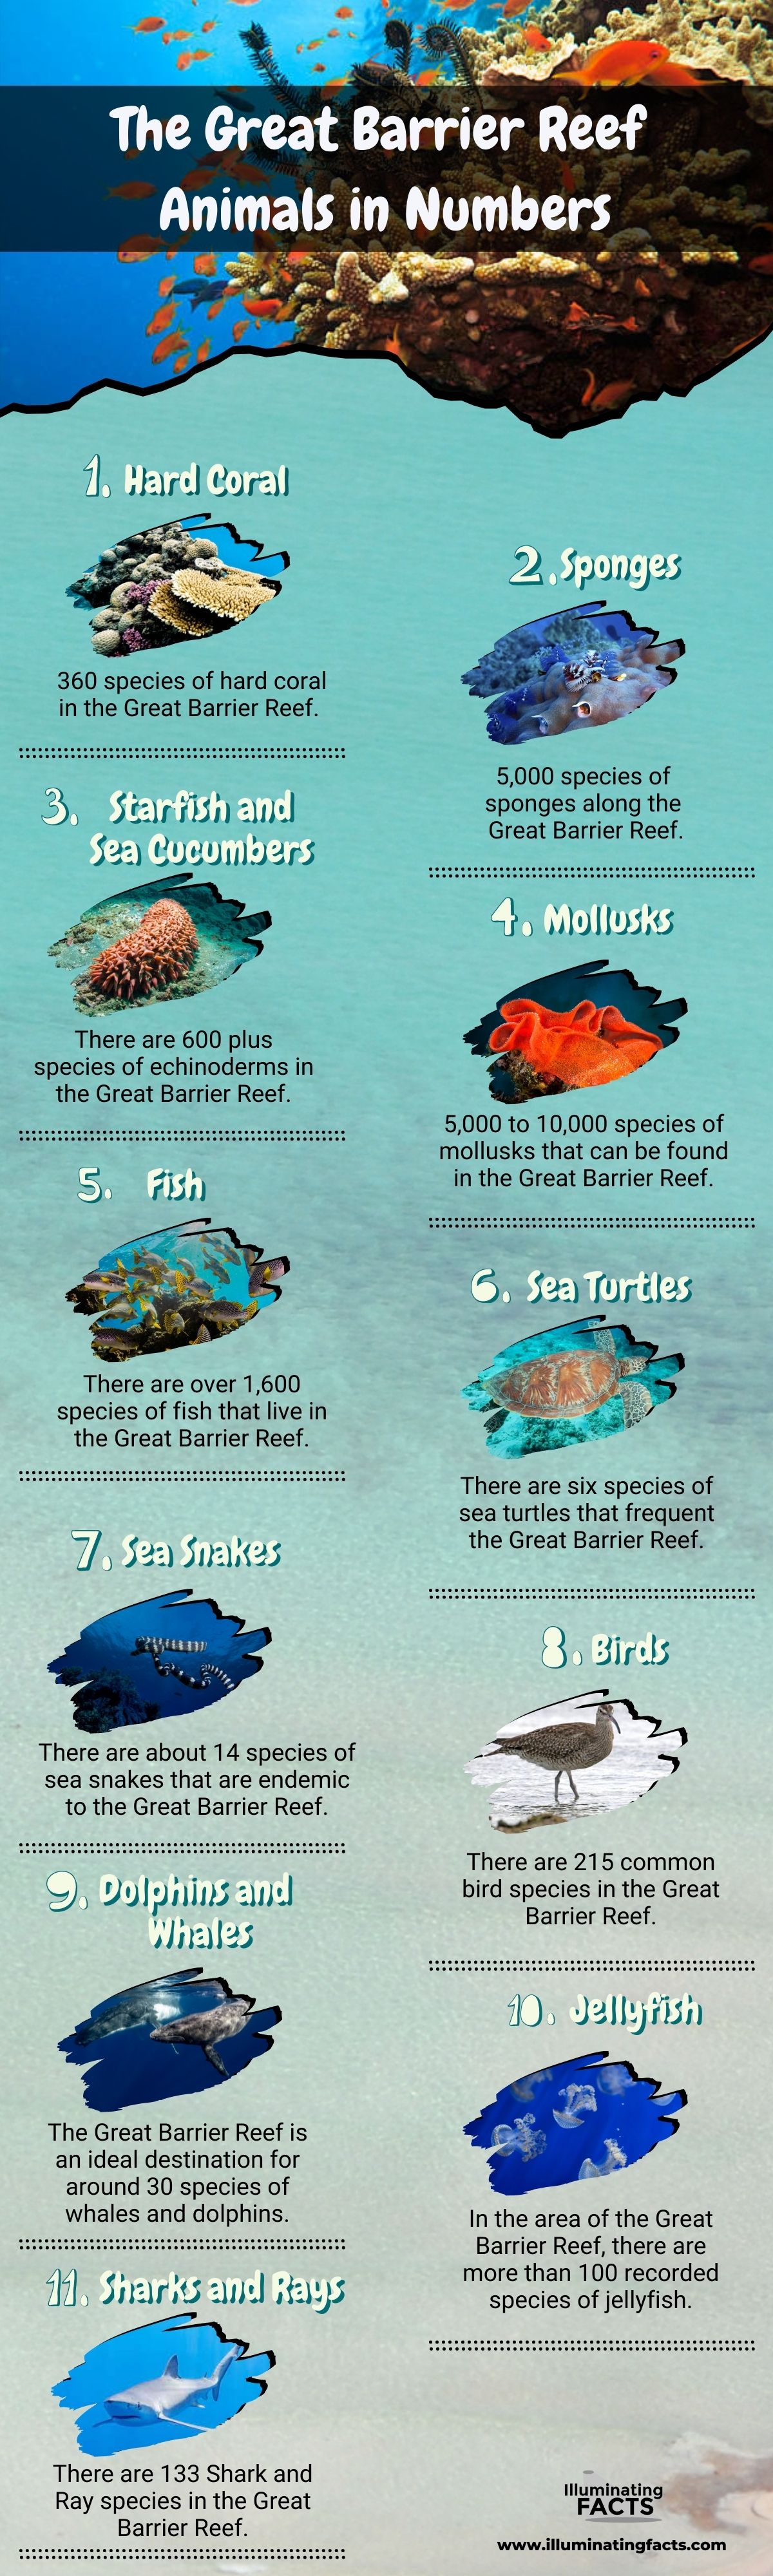 The Great Barrier Reef Animals in Numbers